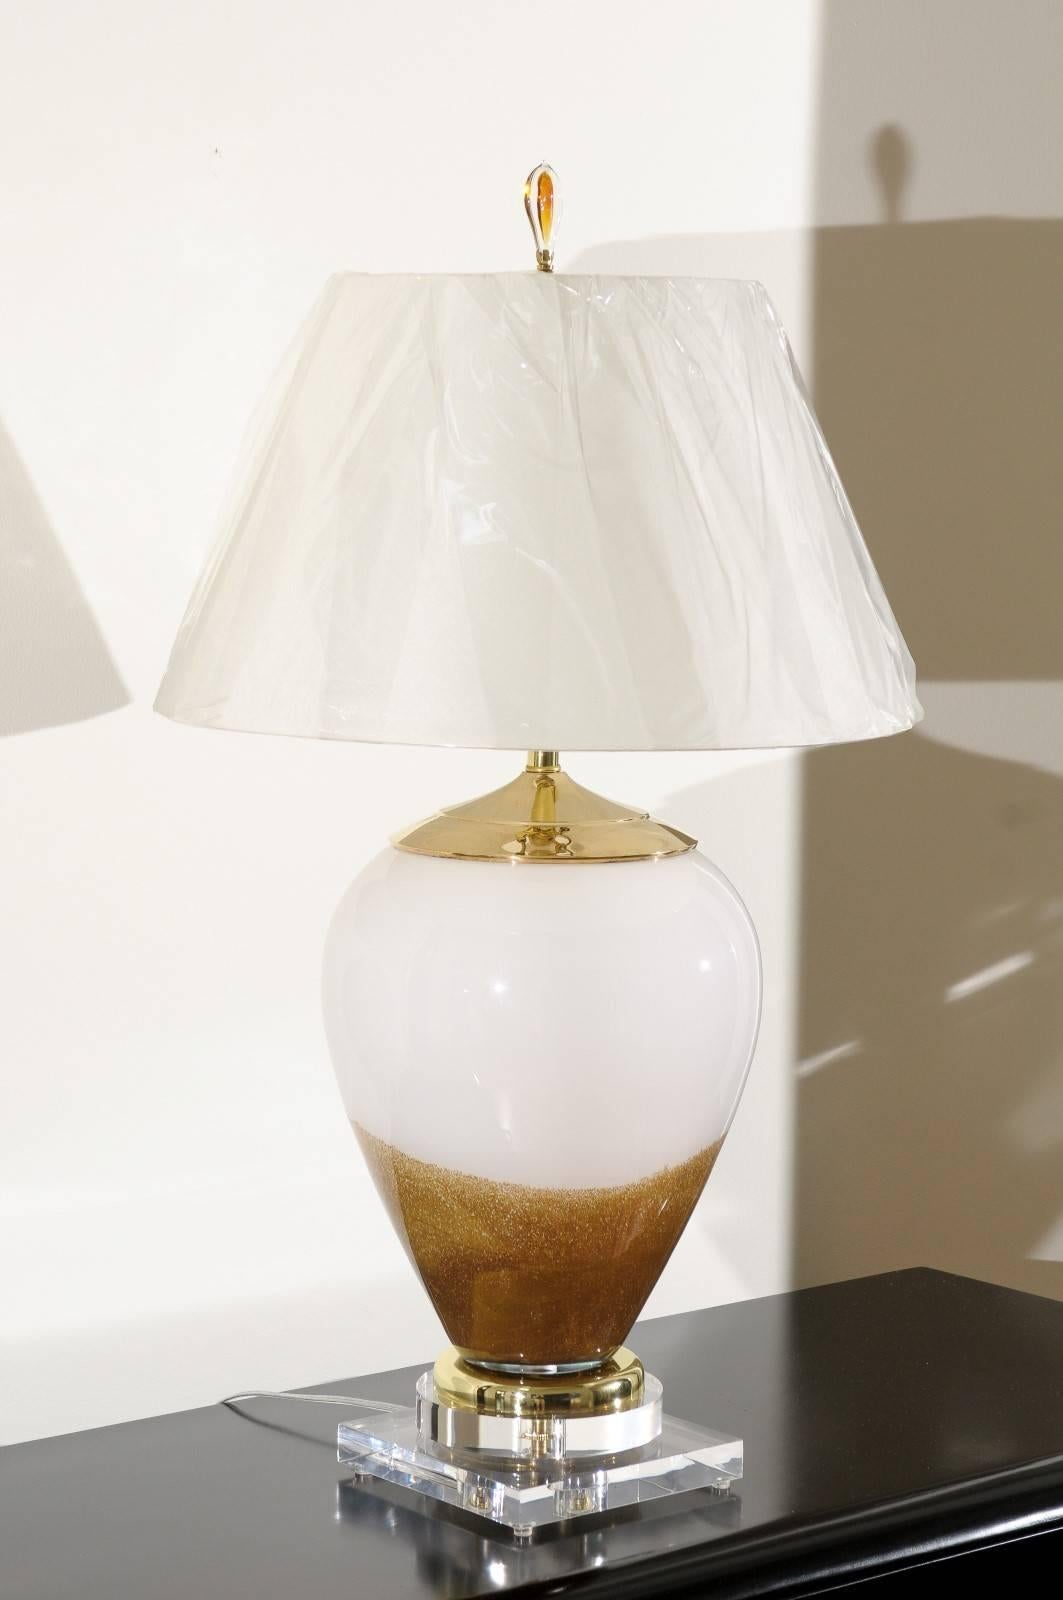 Exceptional Pair of Blown Glass Lamps in Caramel and Cream, Poland, circa 1990 For Sale 1